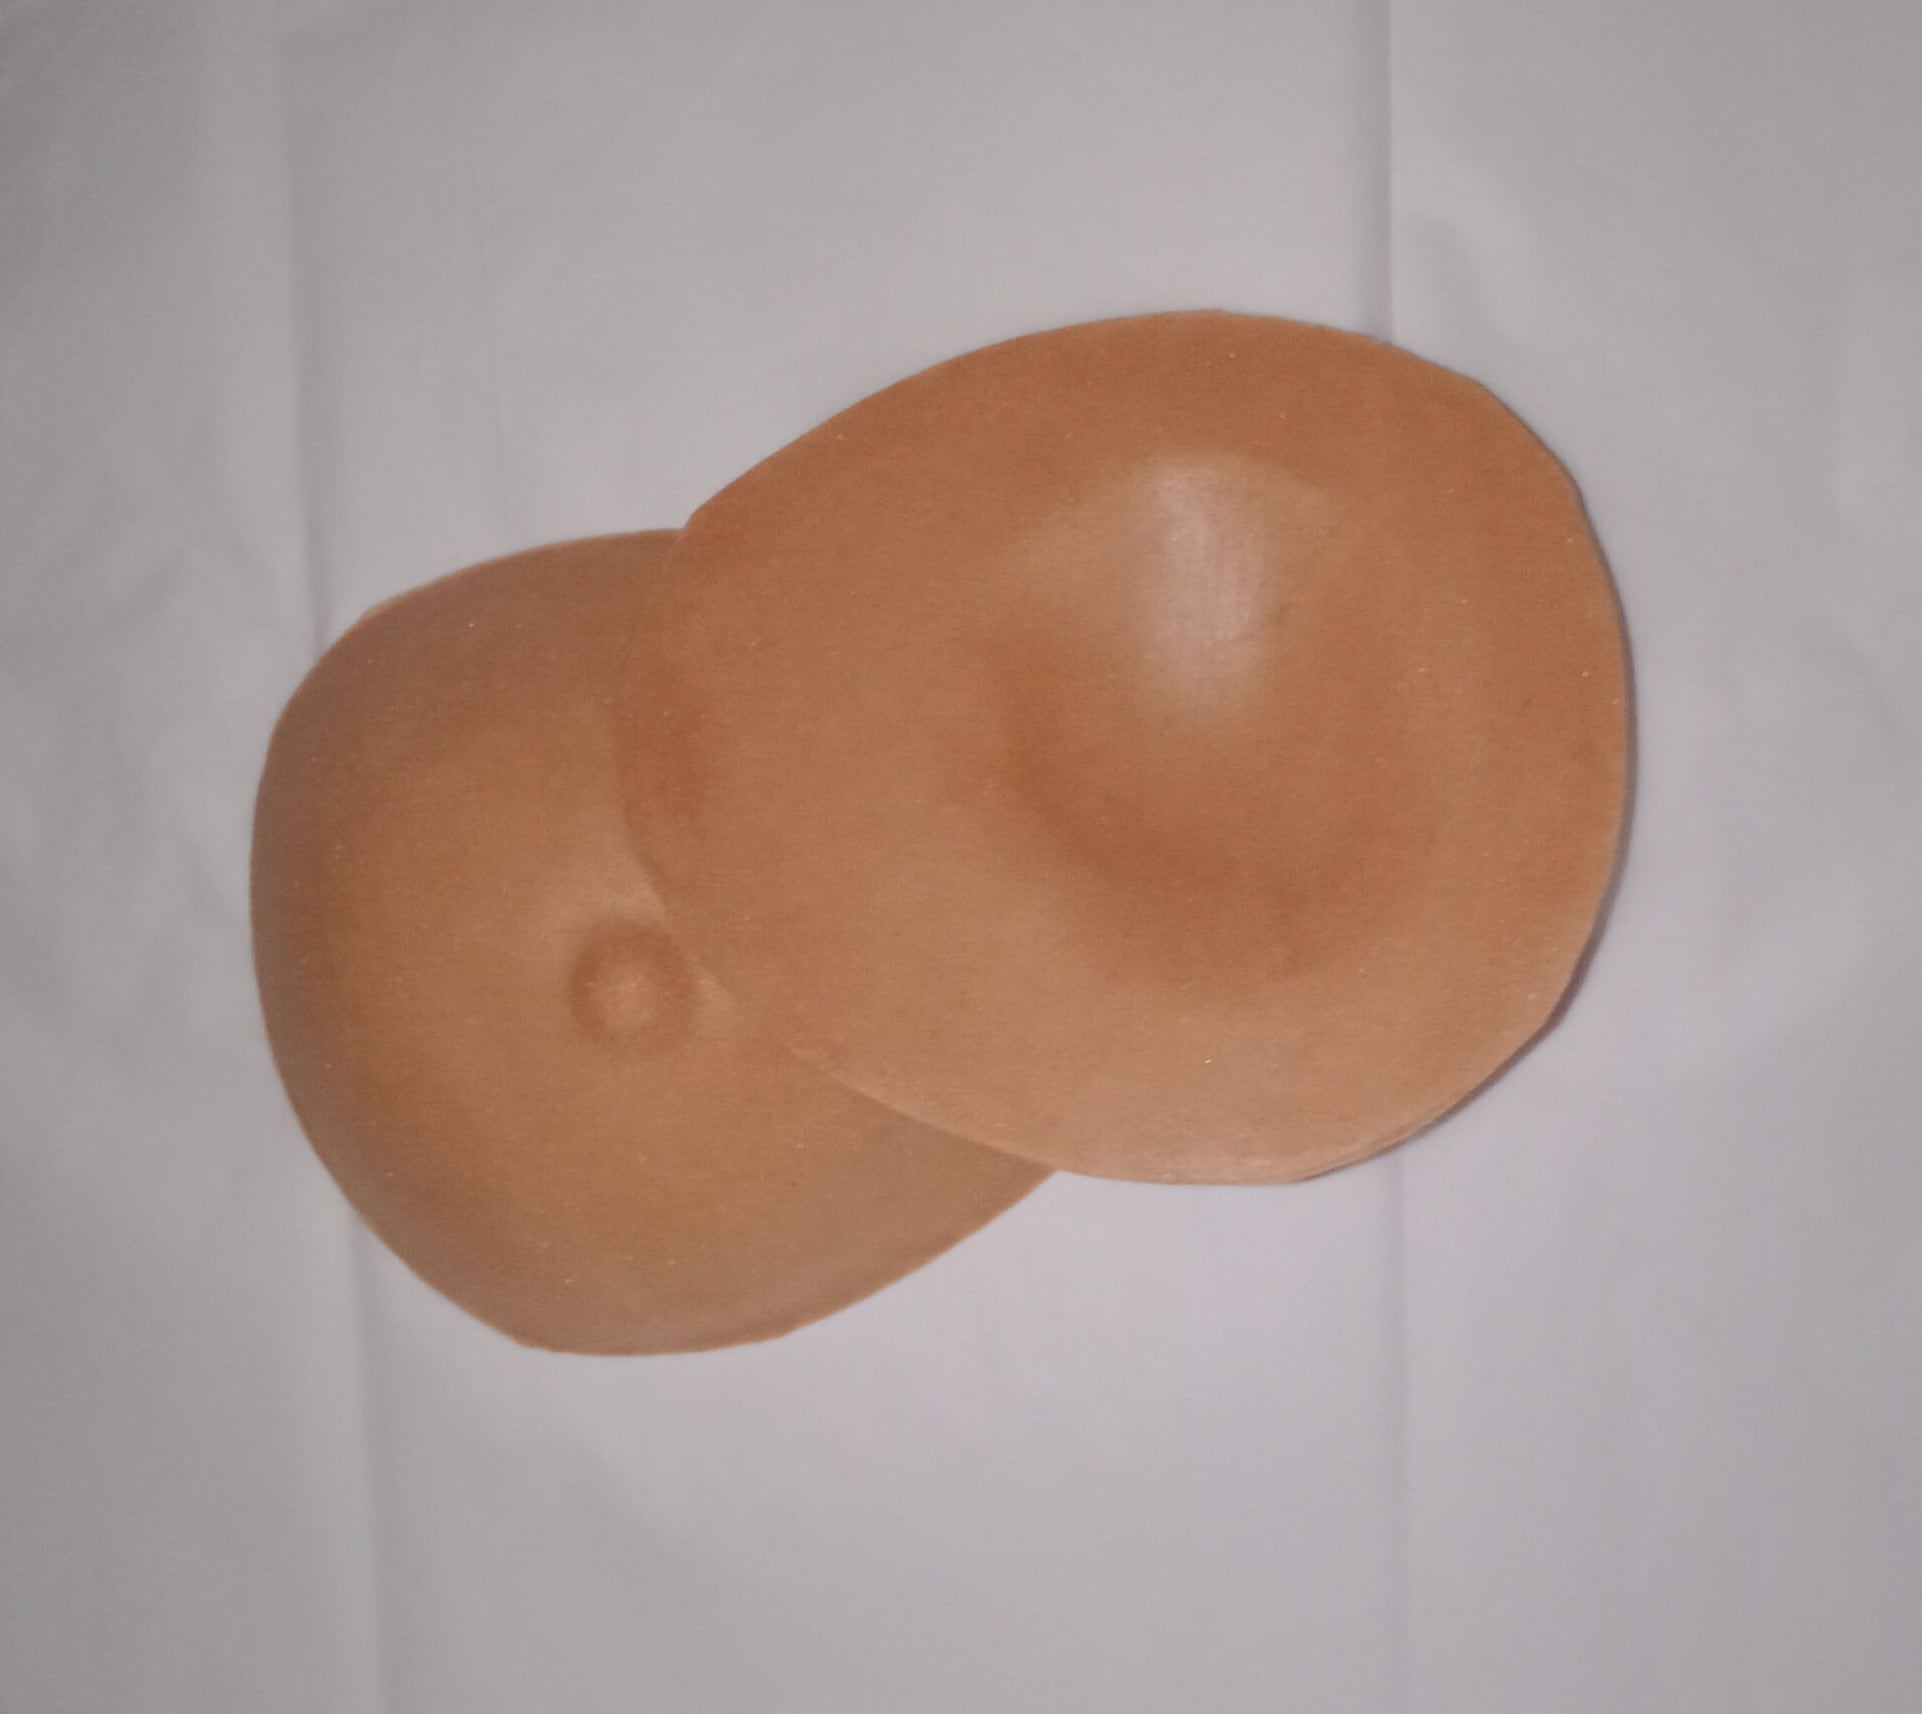 Breast Forms Pair, Size M medium Fake Foam Boobs, B-cup Falsies, Prosthetic  for Cosplay or Mastectomy -  Sweden